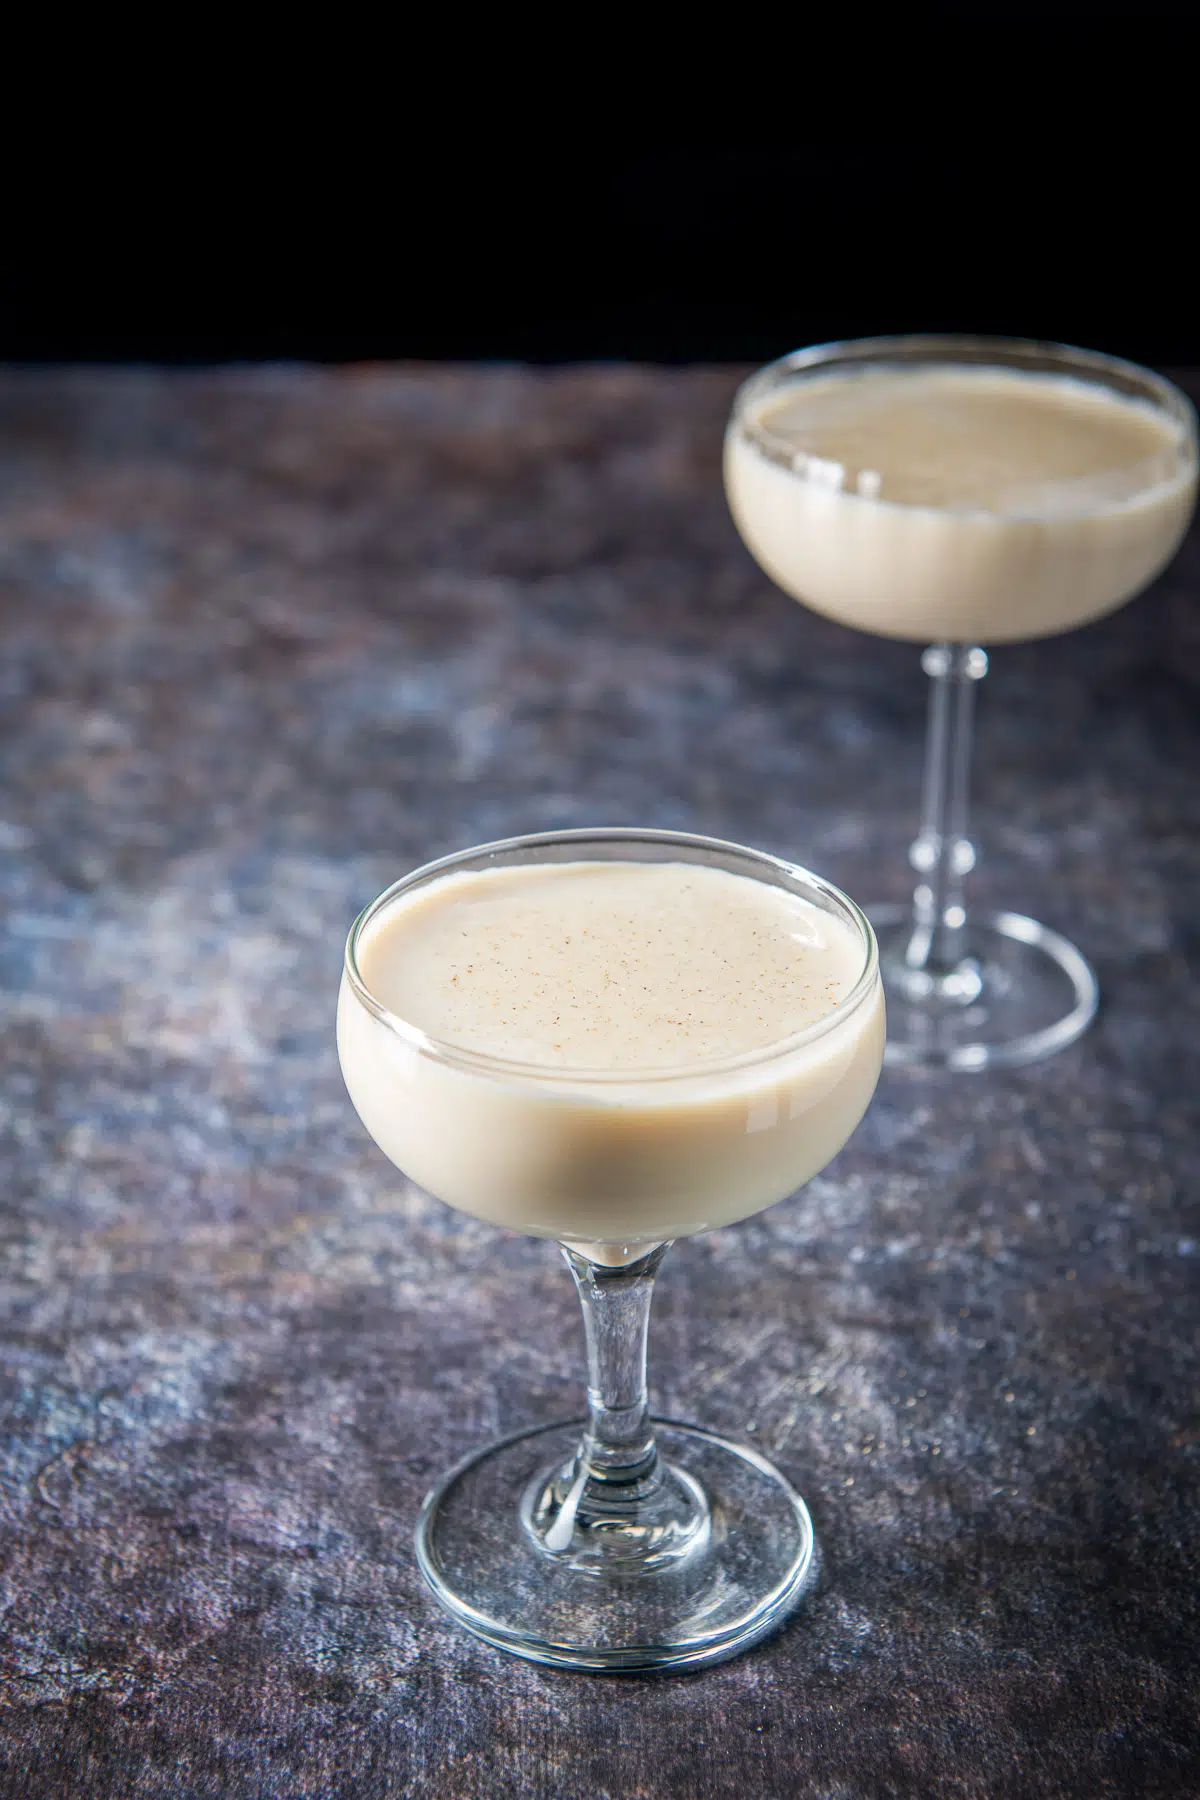 Nutmeg floating on the Brandy Alexander in the two coupe glasses